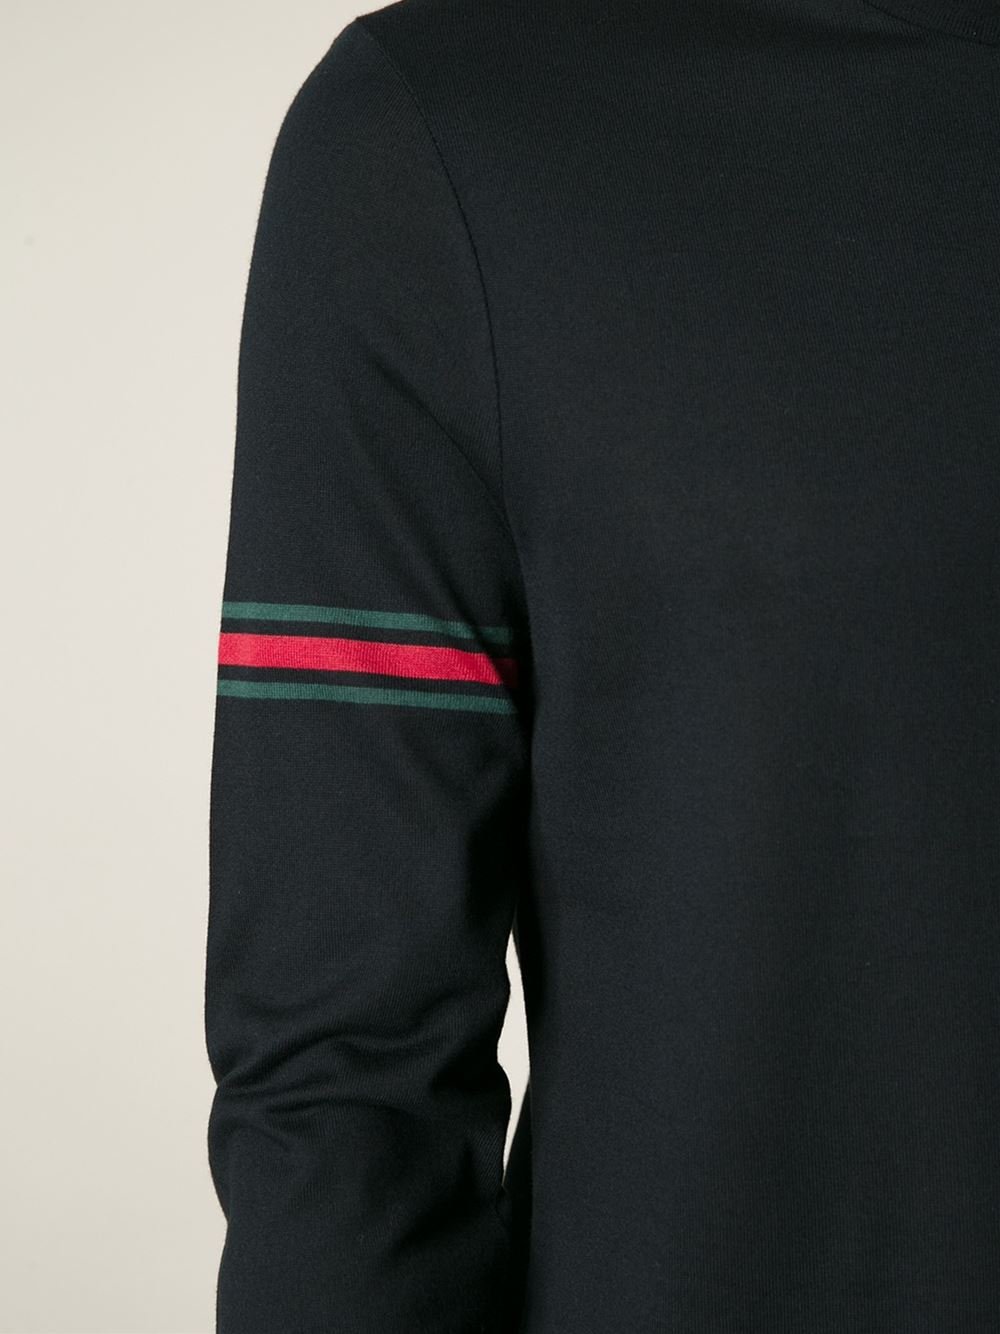 Gucci Long Sleeve T-Shirt in Black for Men - Lyst